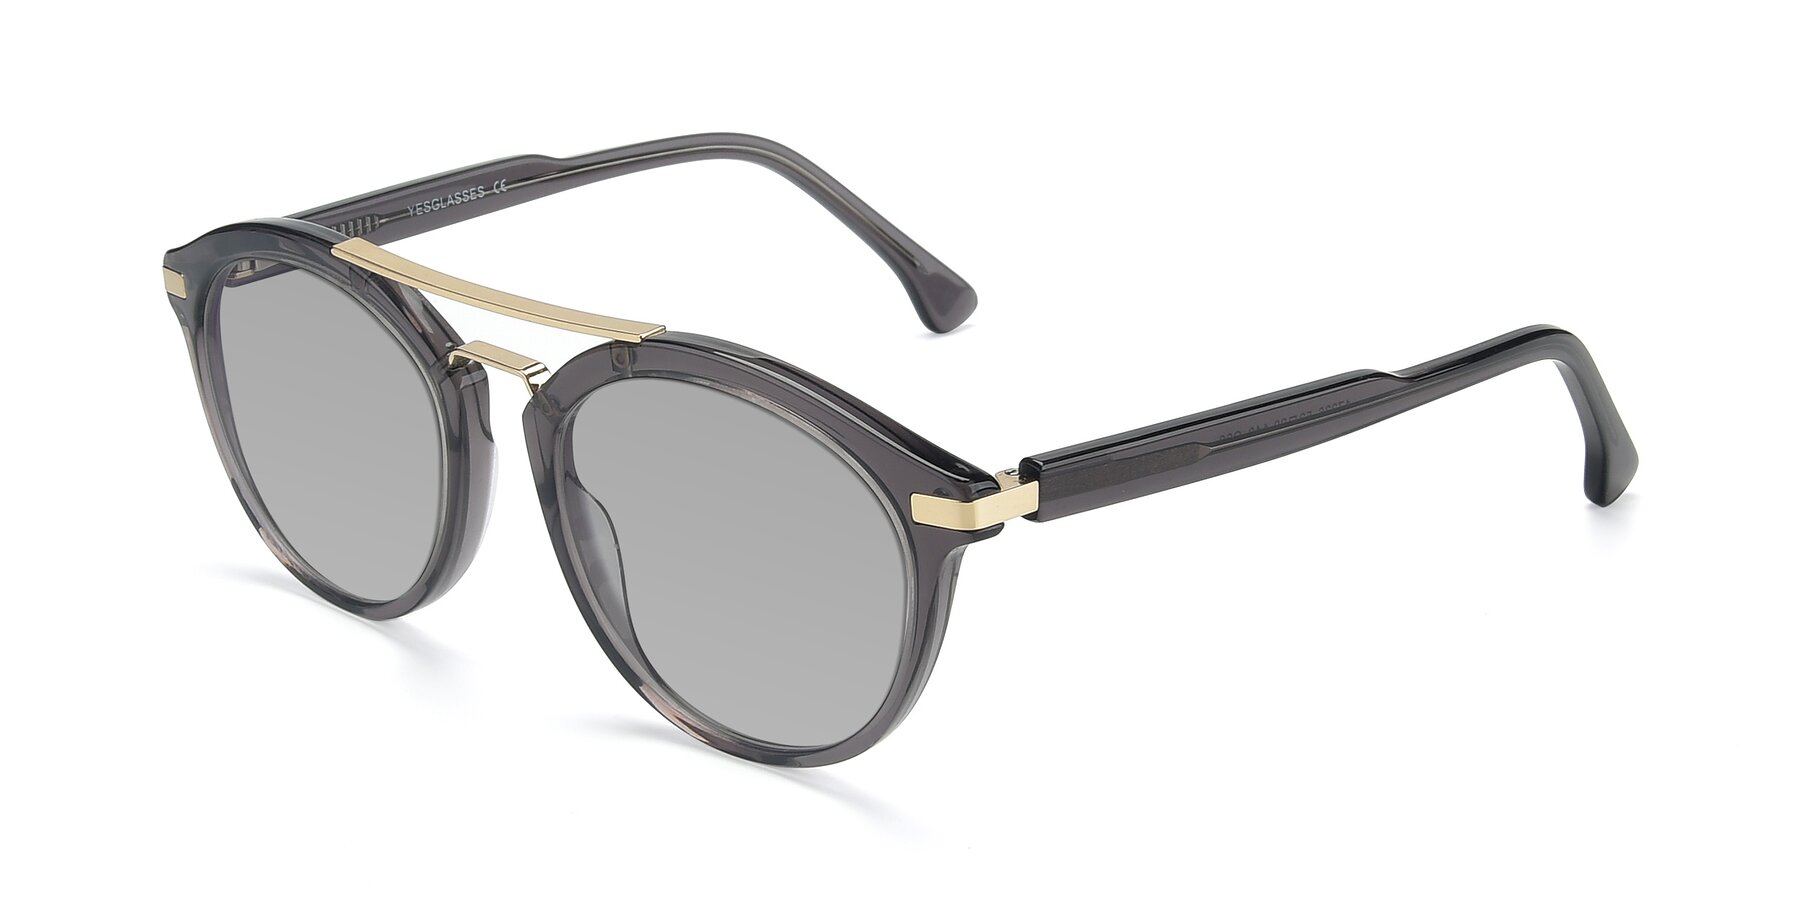 Angle of 17236 in Gray-Gold with Light Gray Tinted Lenses